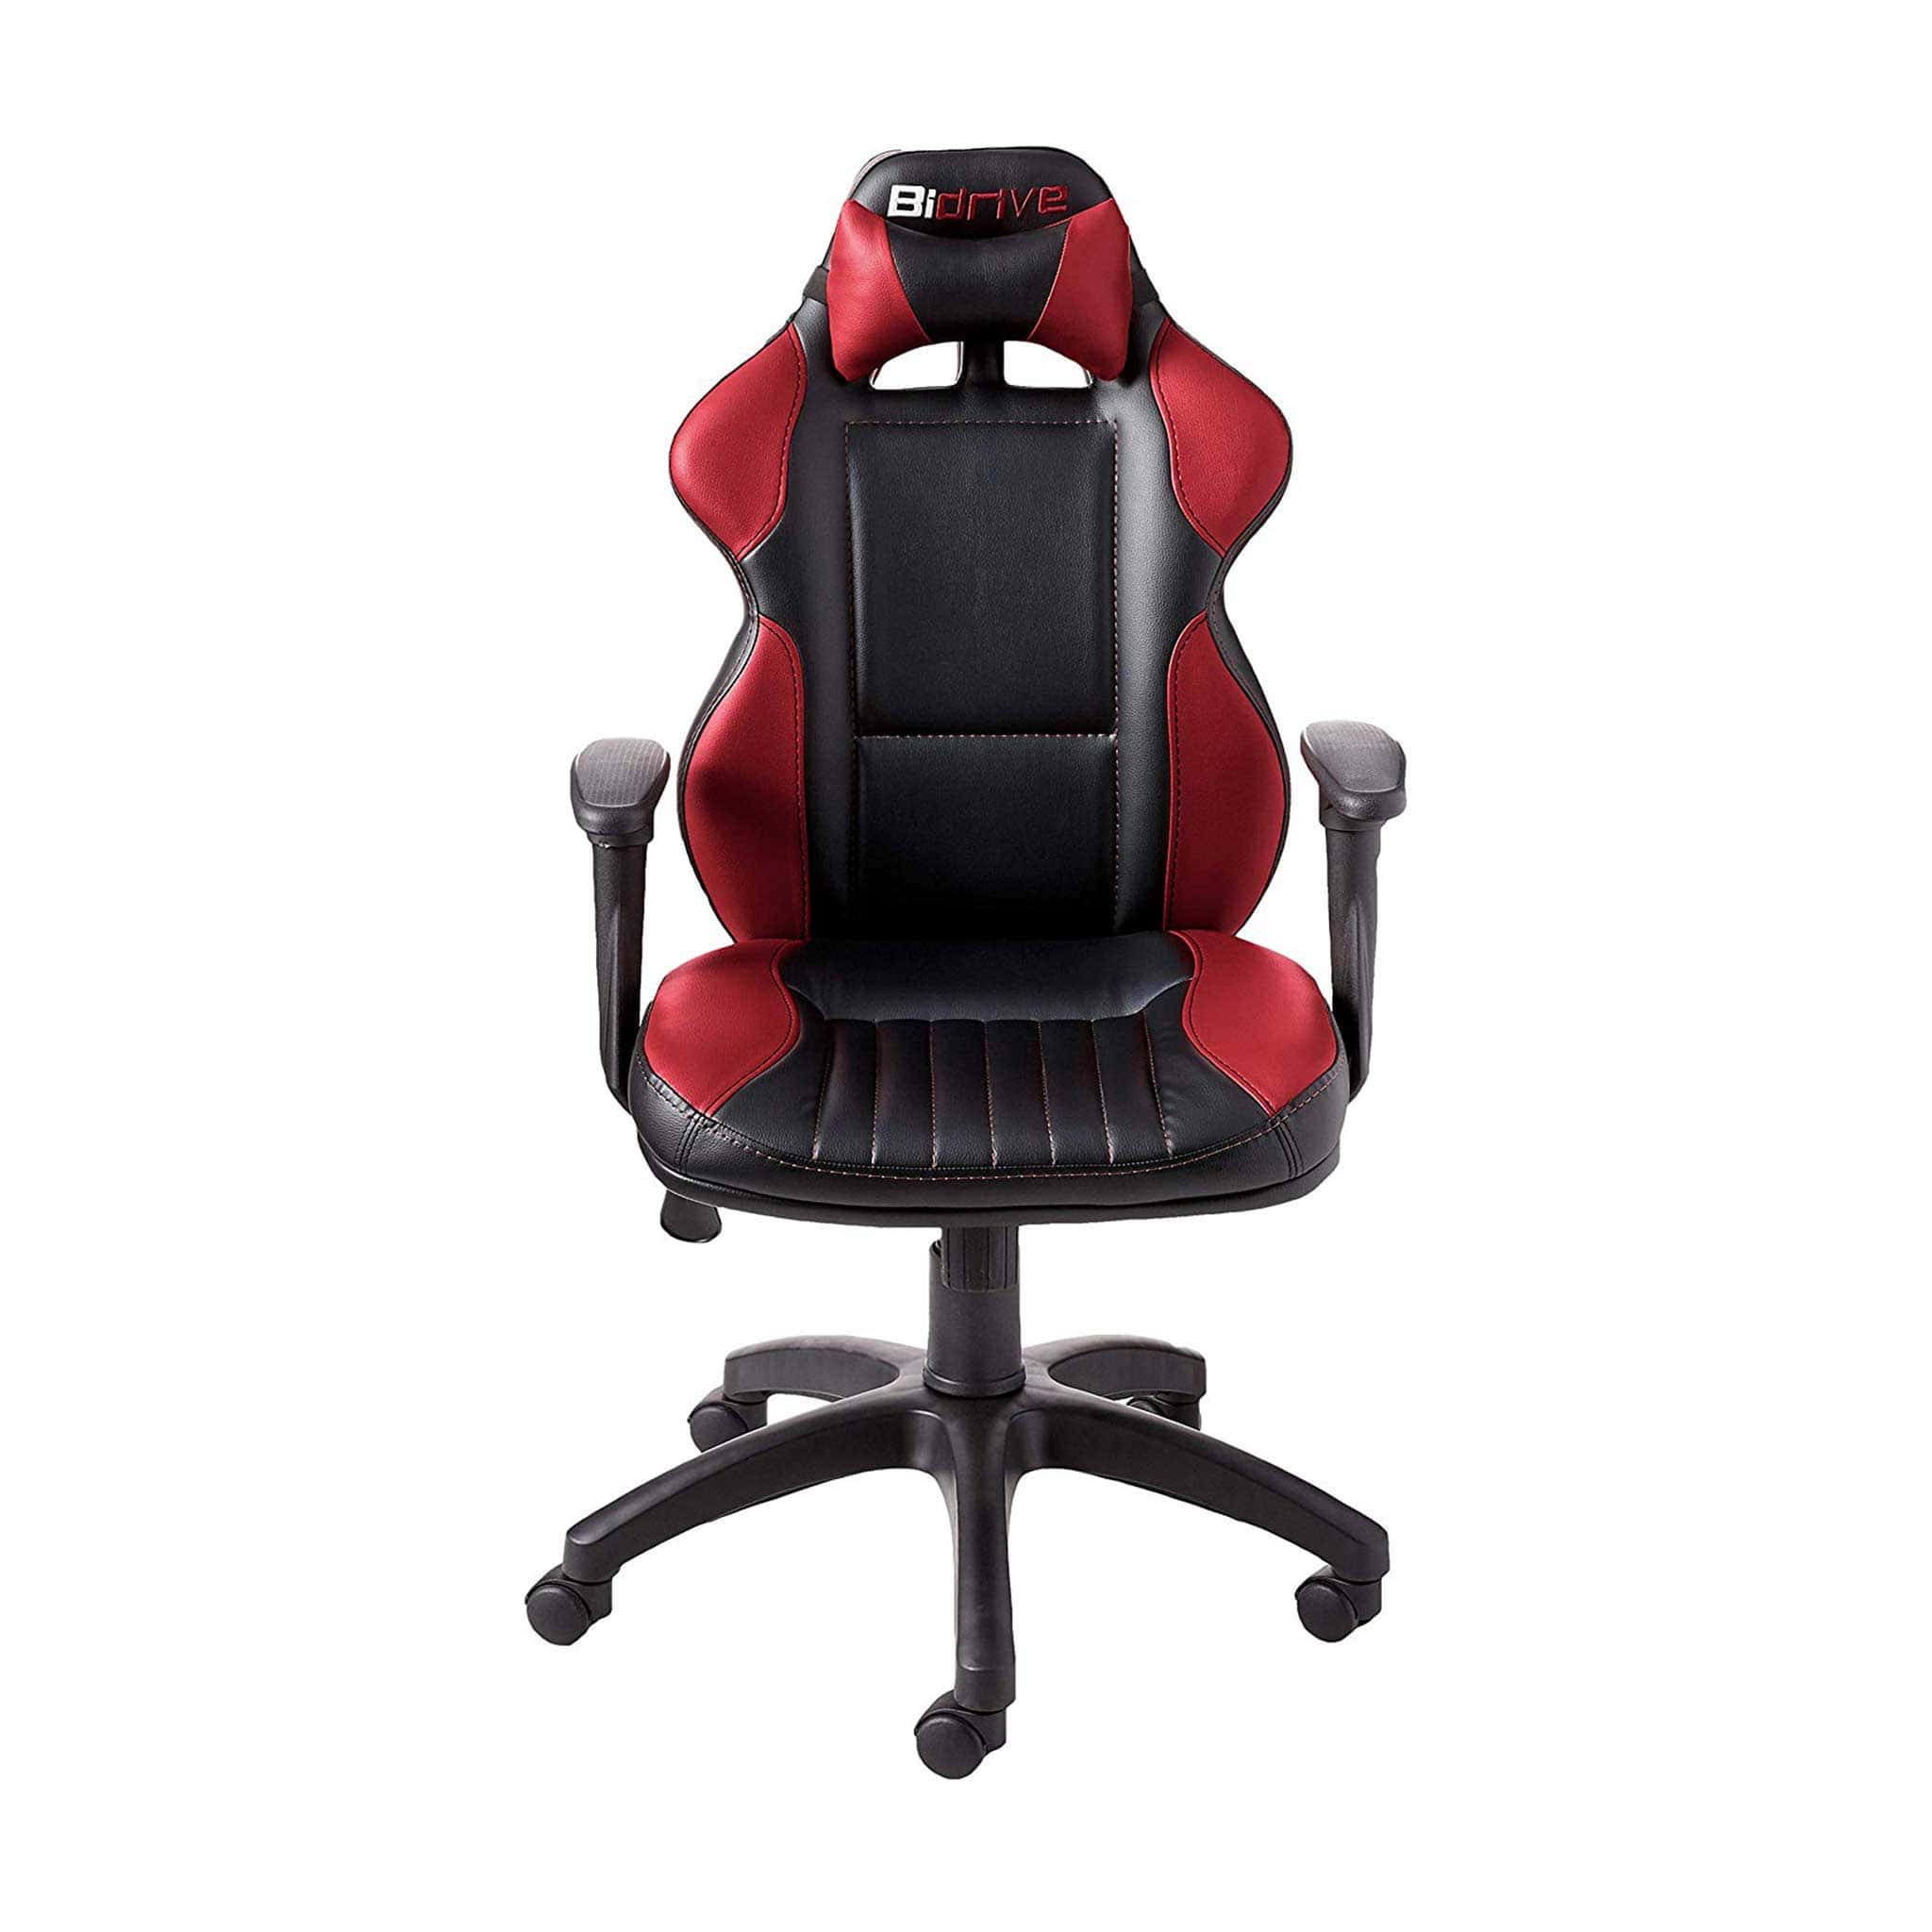 GTS Ergonomic Swivel Gaming Chair with Armrests